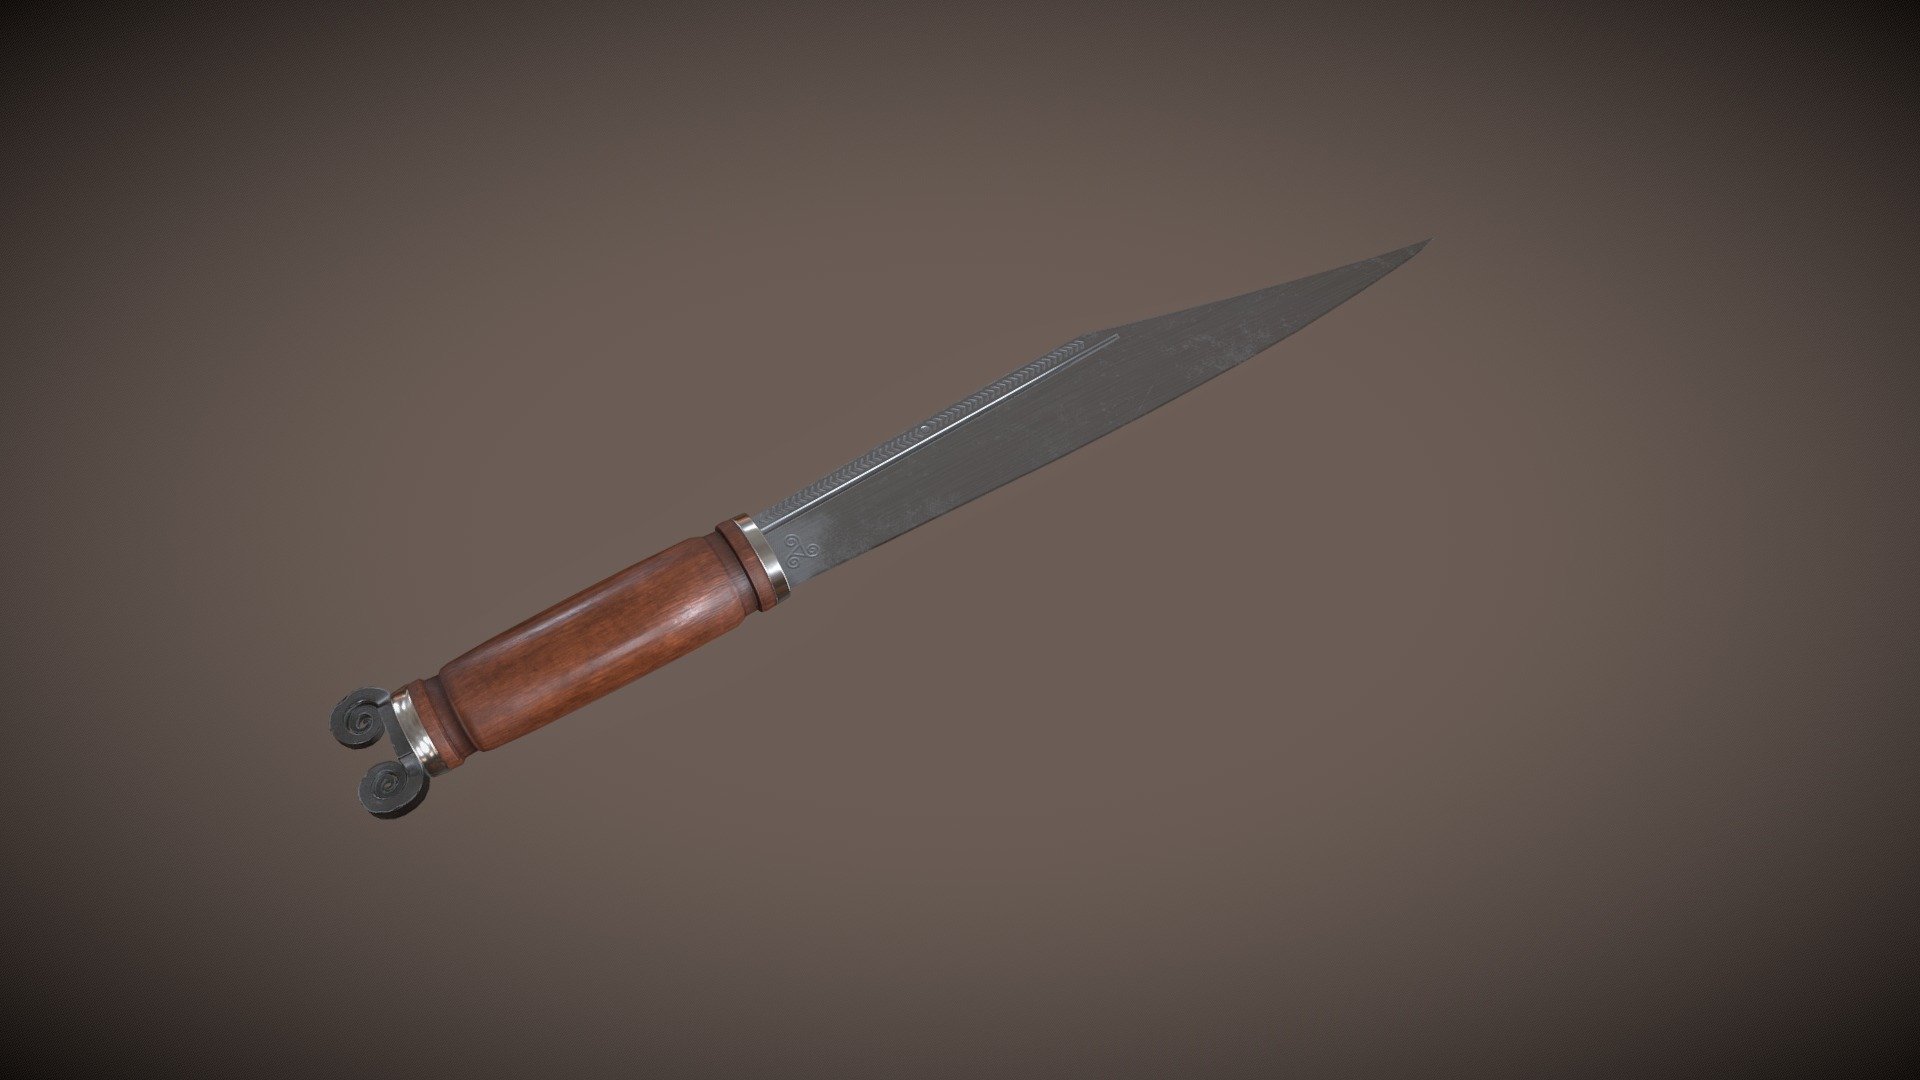 Dagger with a wooden handle